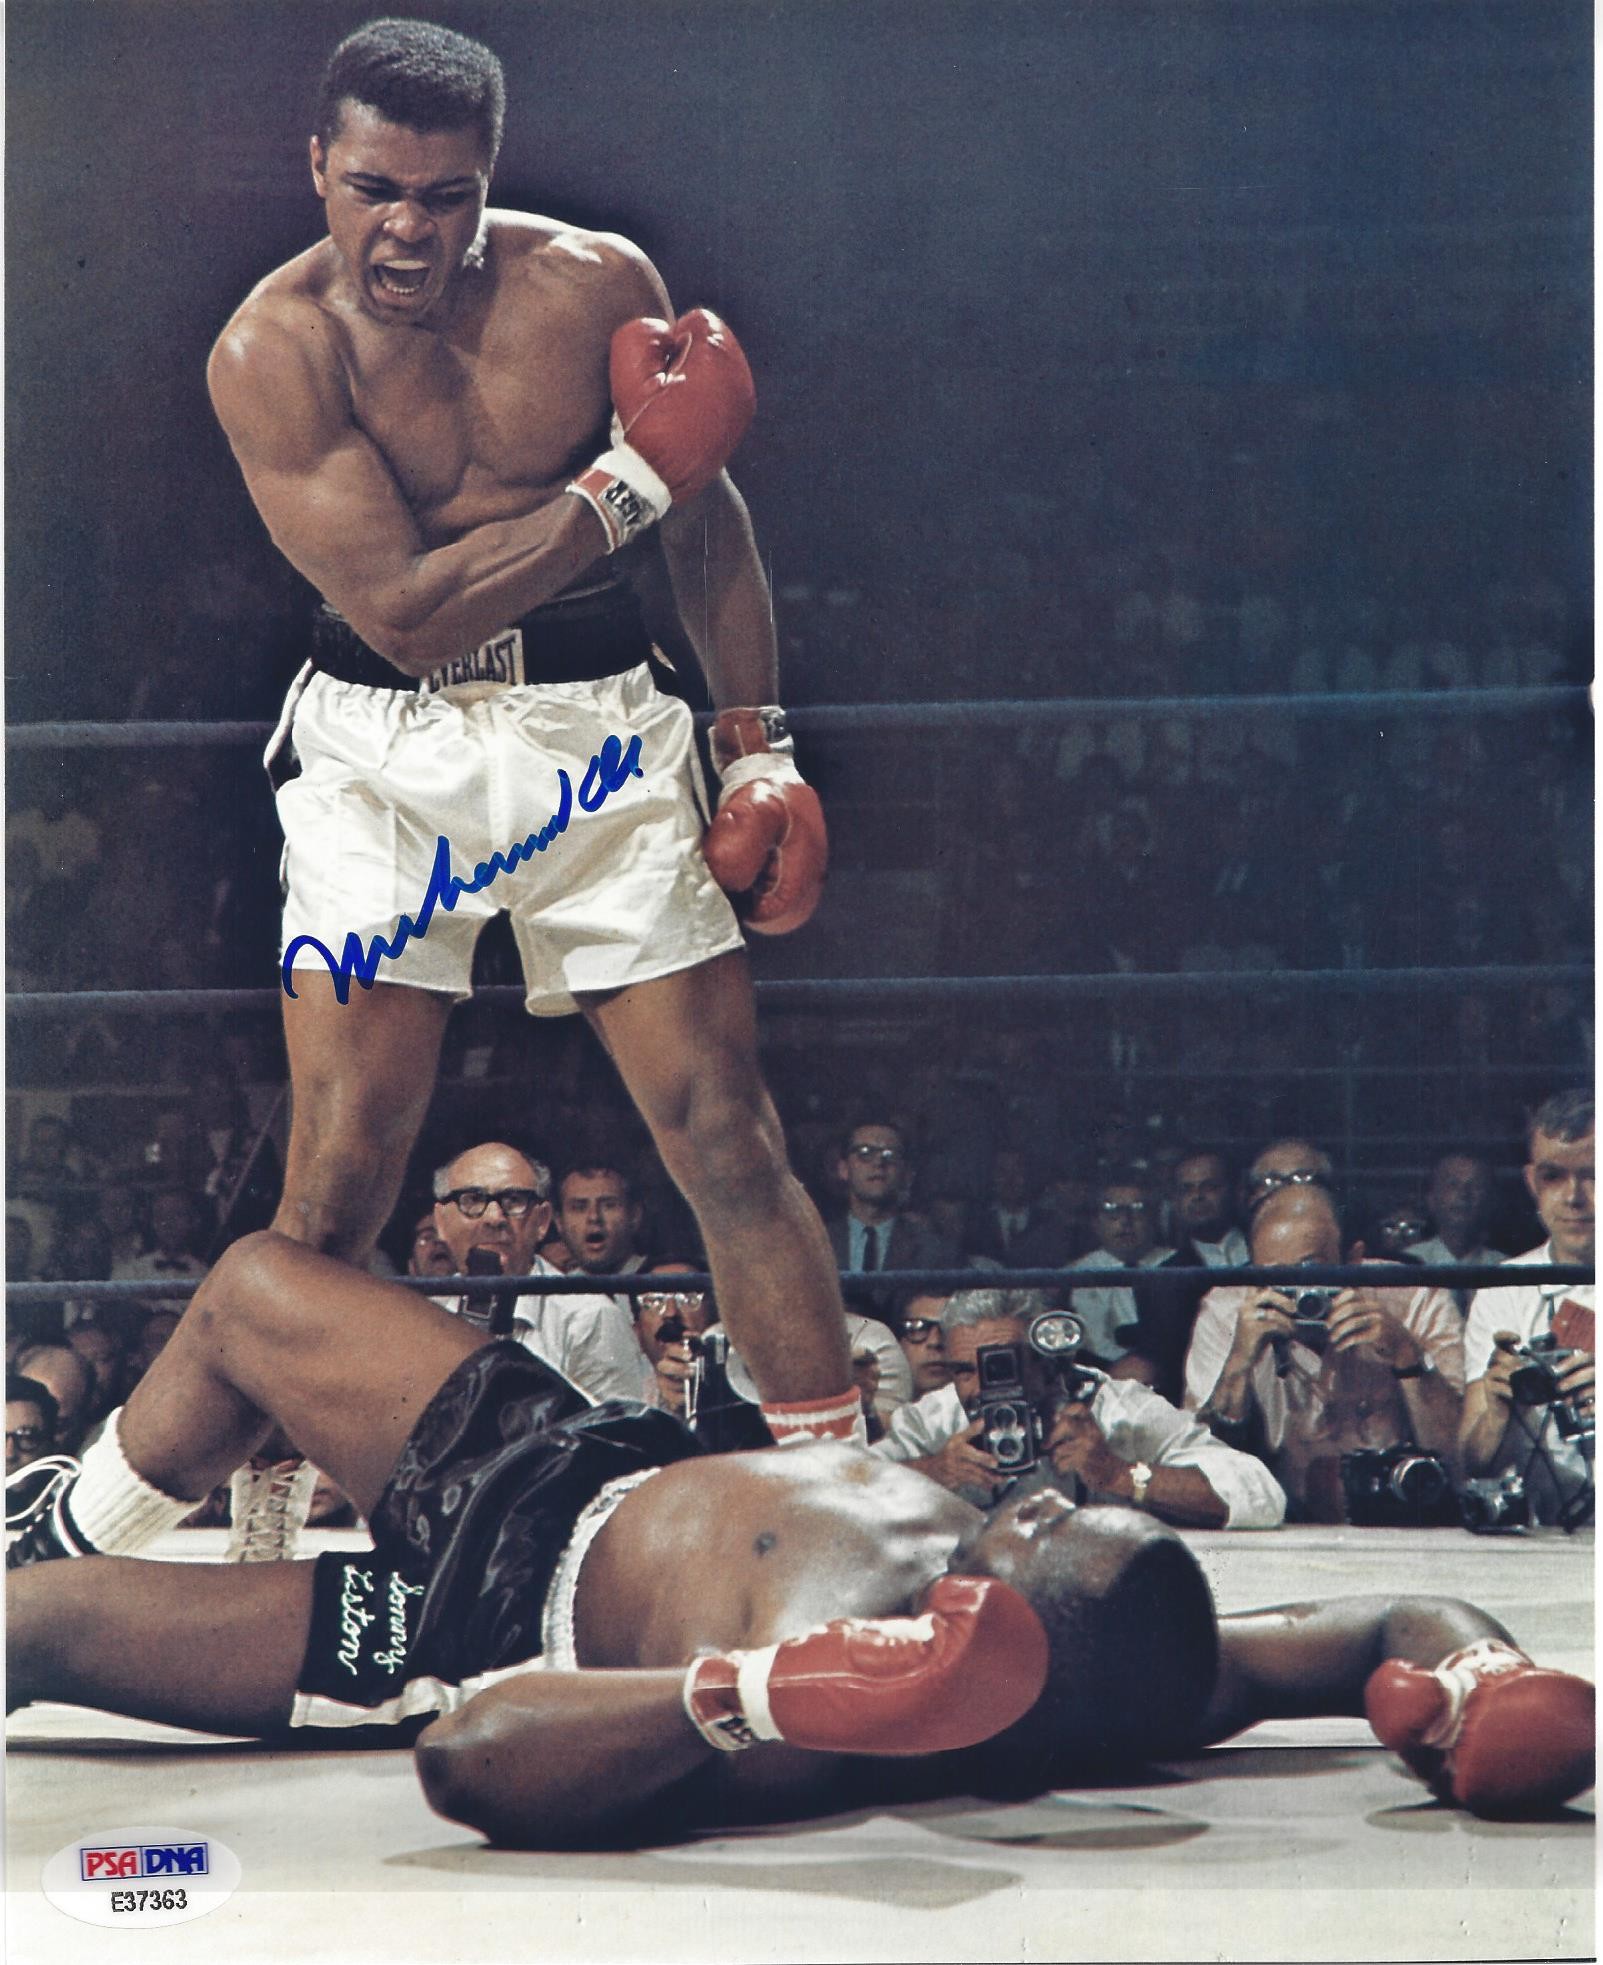 Signed 8x10 of Muhammad Ali after knocking down Sonny Liston in the ring Comes with Letter of Authenticity